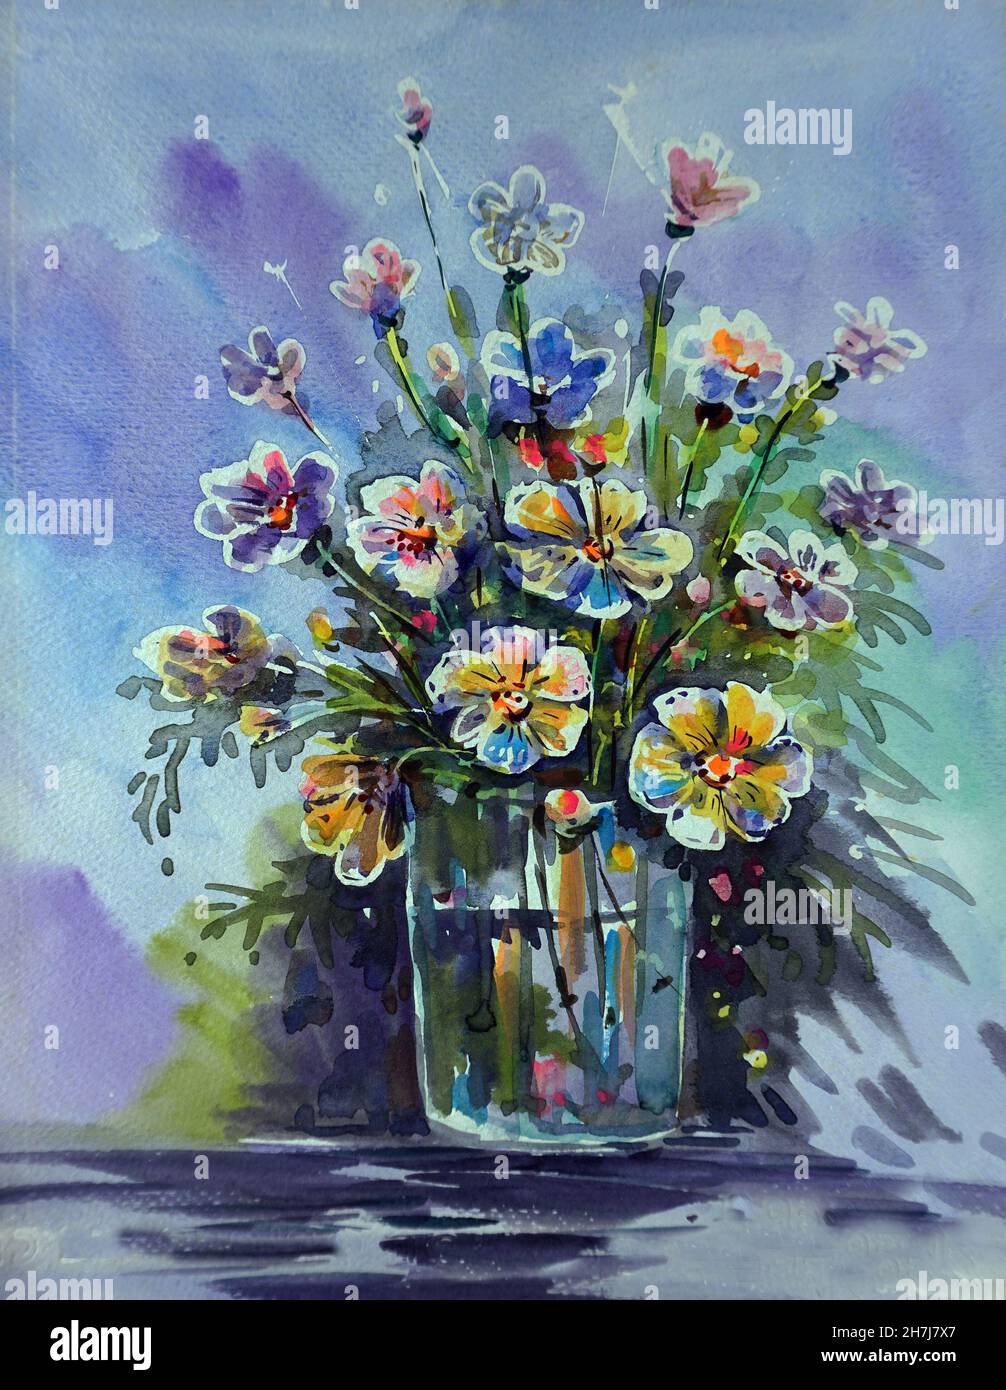 Paint By Number | Bunch of Wild Flowers in a Vase